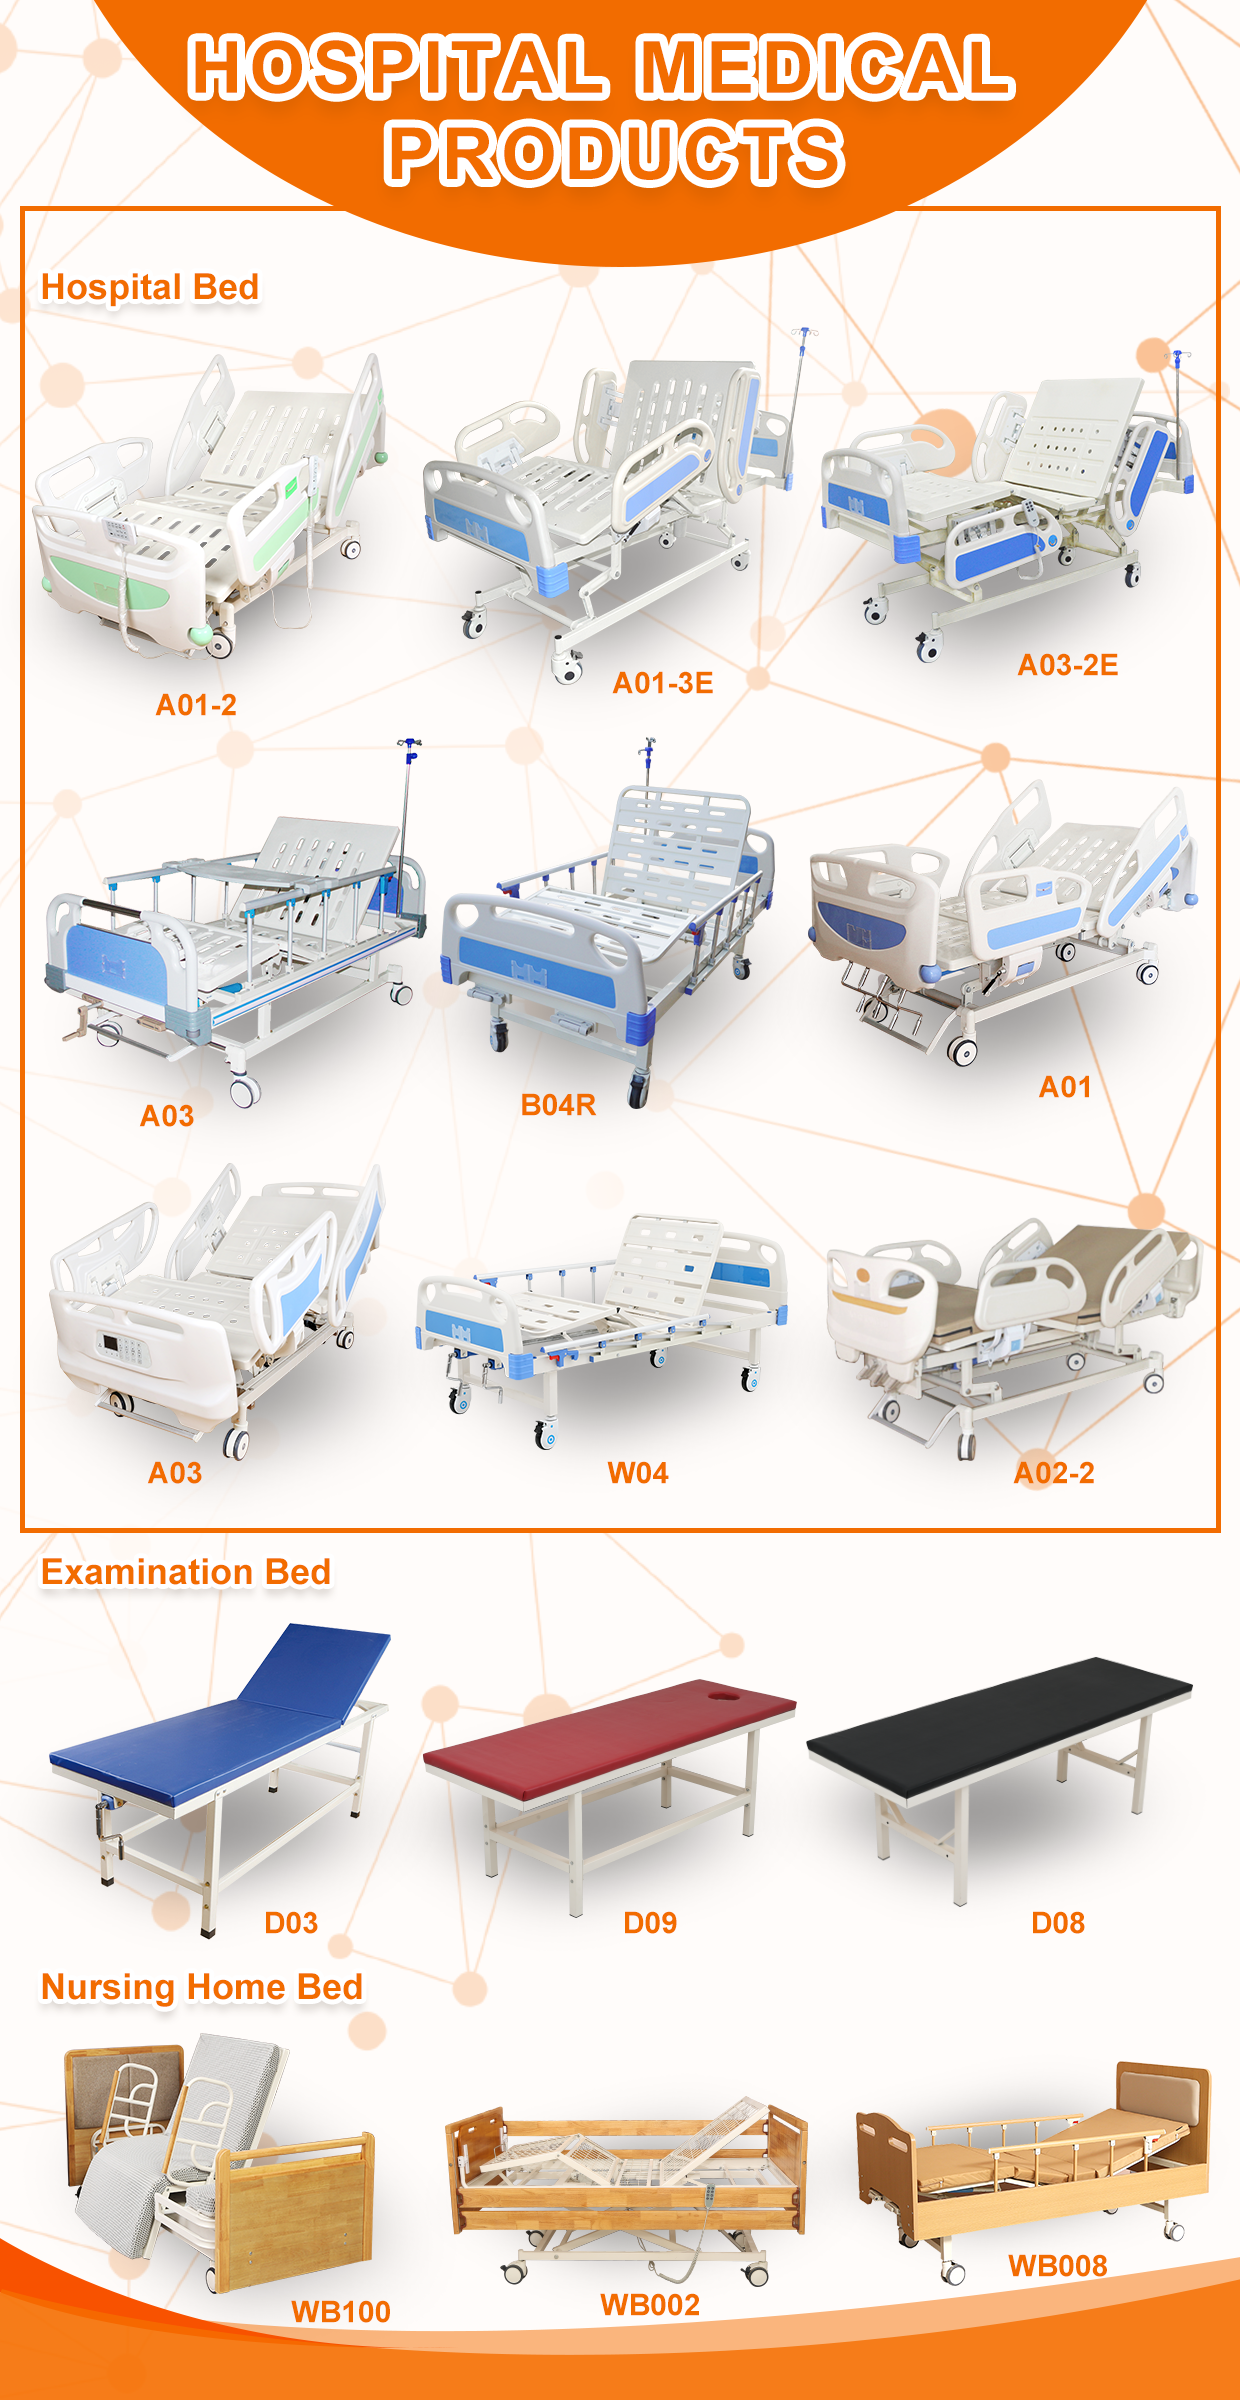 What are the characteristics of hospital furniture?